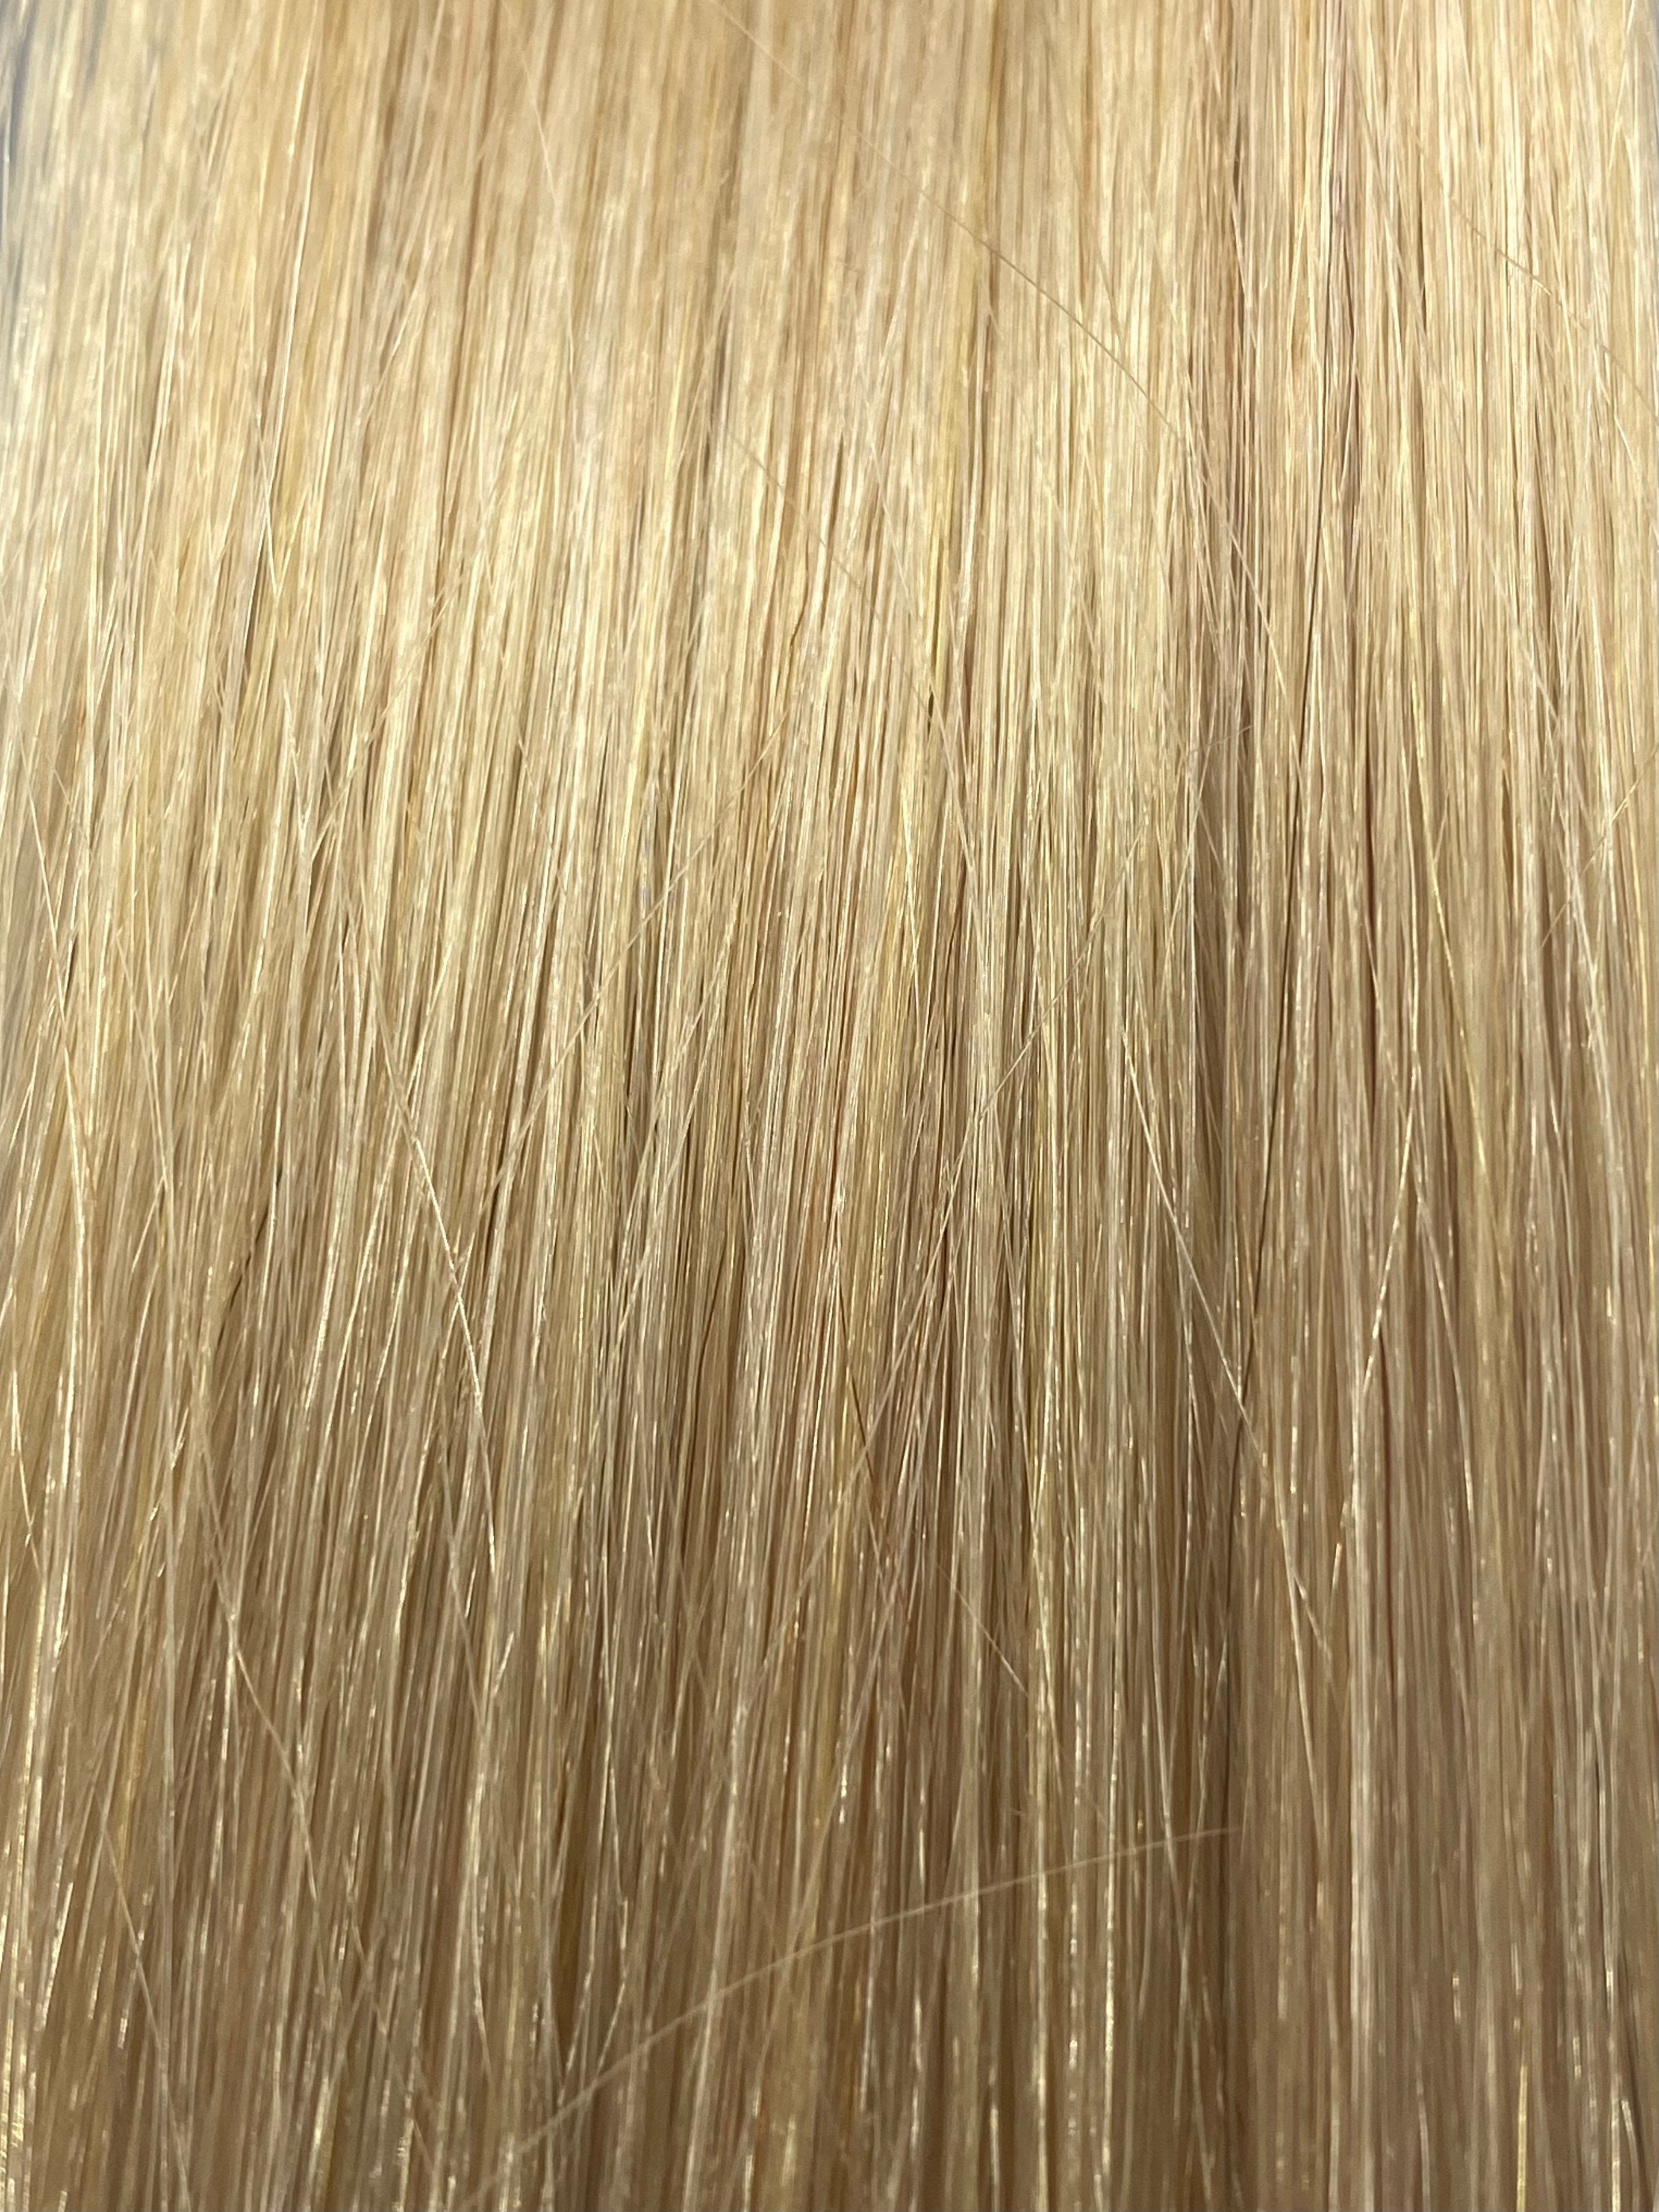 Satin Tape #1002 - 50cm/20 Inches - Very Light Ash Blonde - 20 Grams